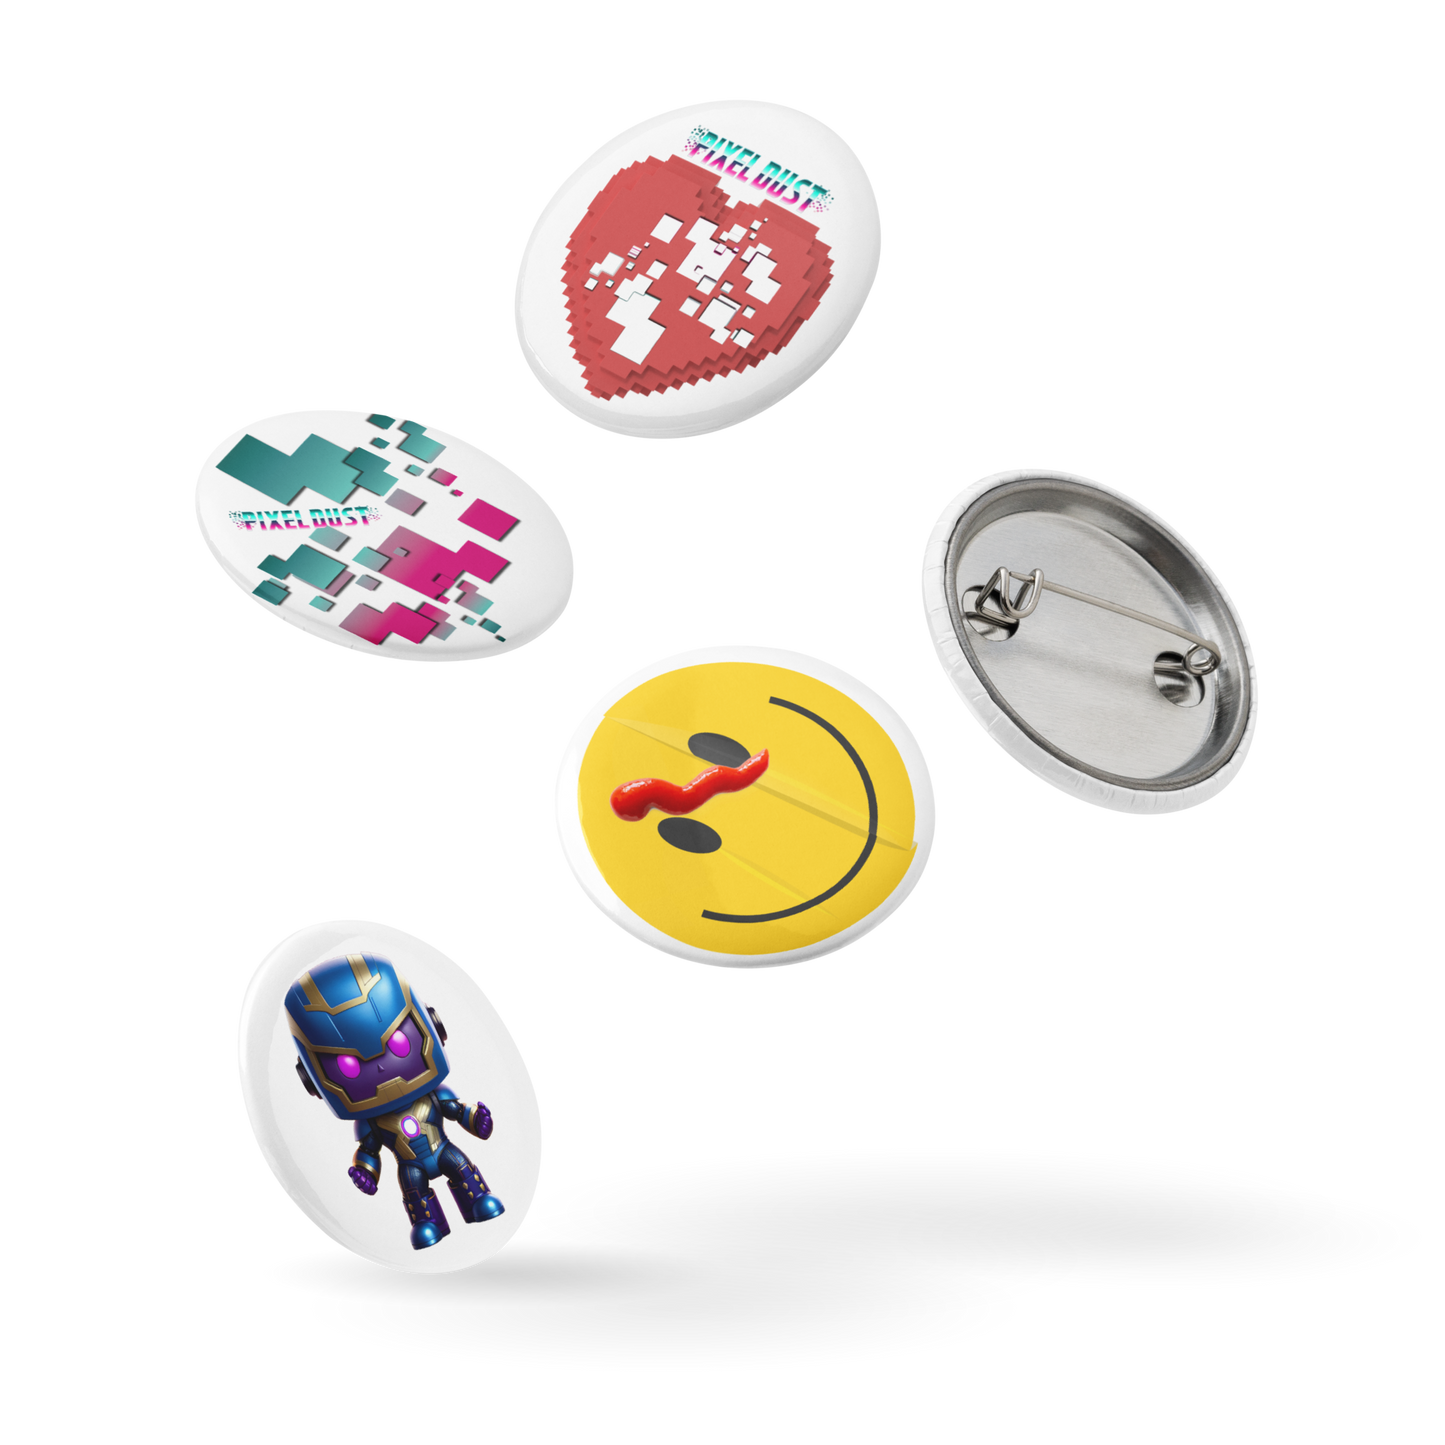 Limited Edition PixelDust Set of 5 pin buttons